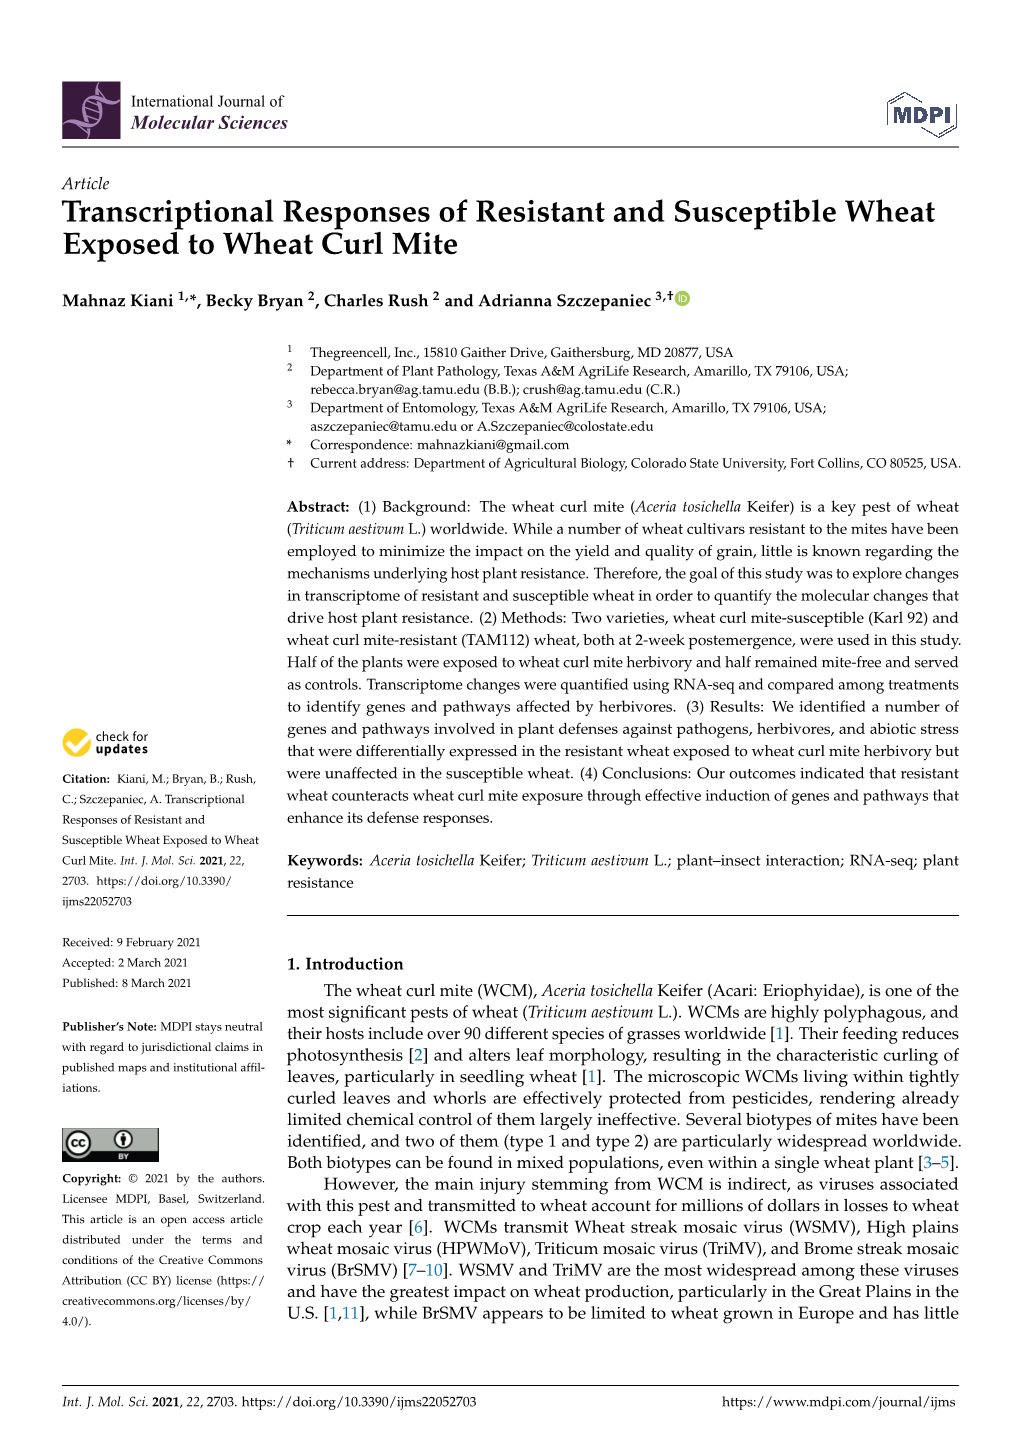 Transcriptional Responses of Resistant and Susceptible Wheat Exposed to Wheat Curl Mite